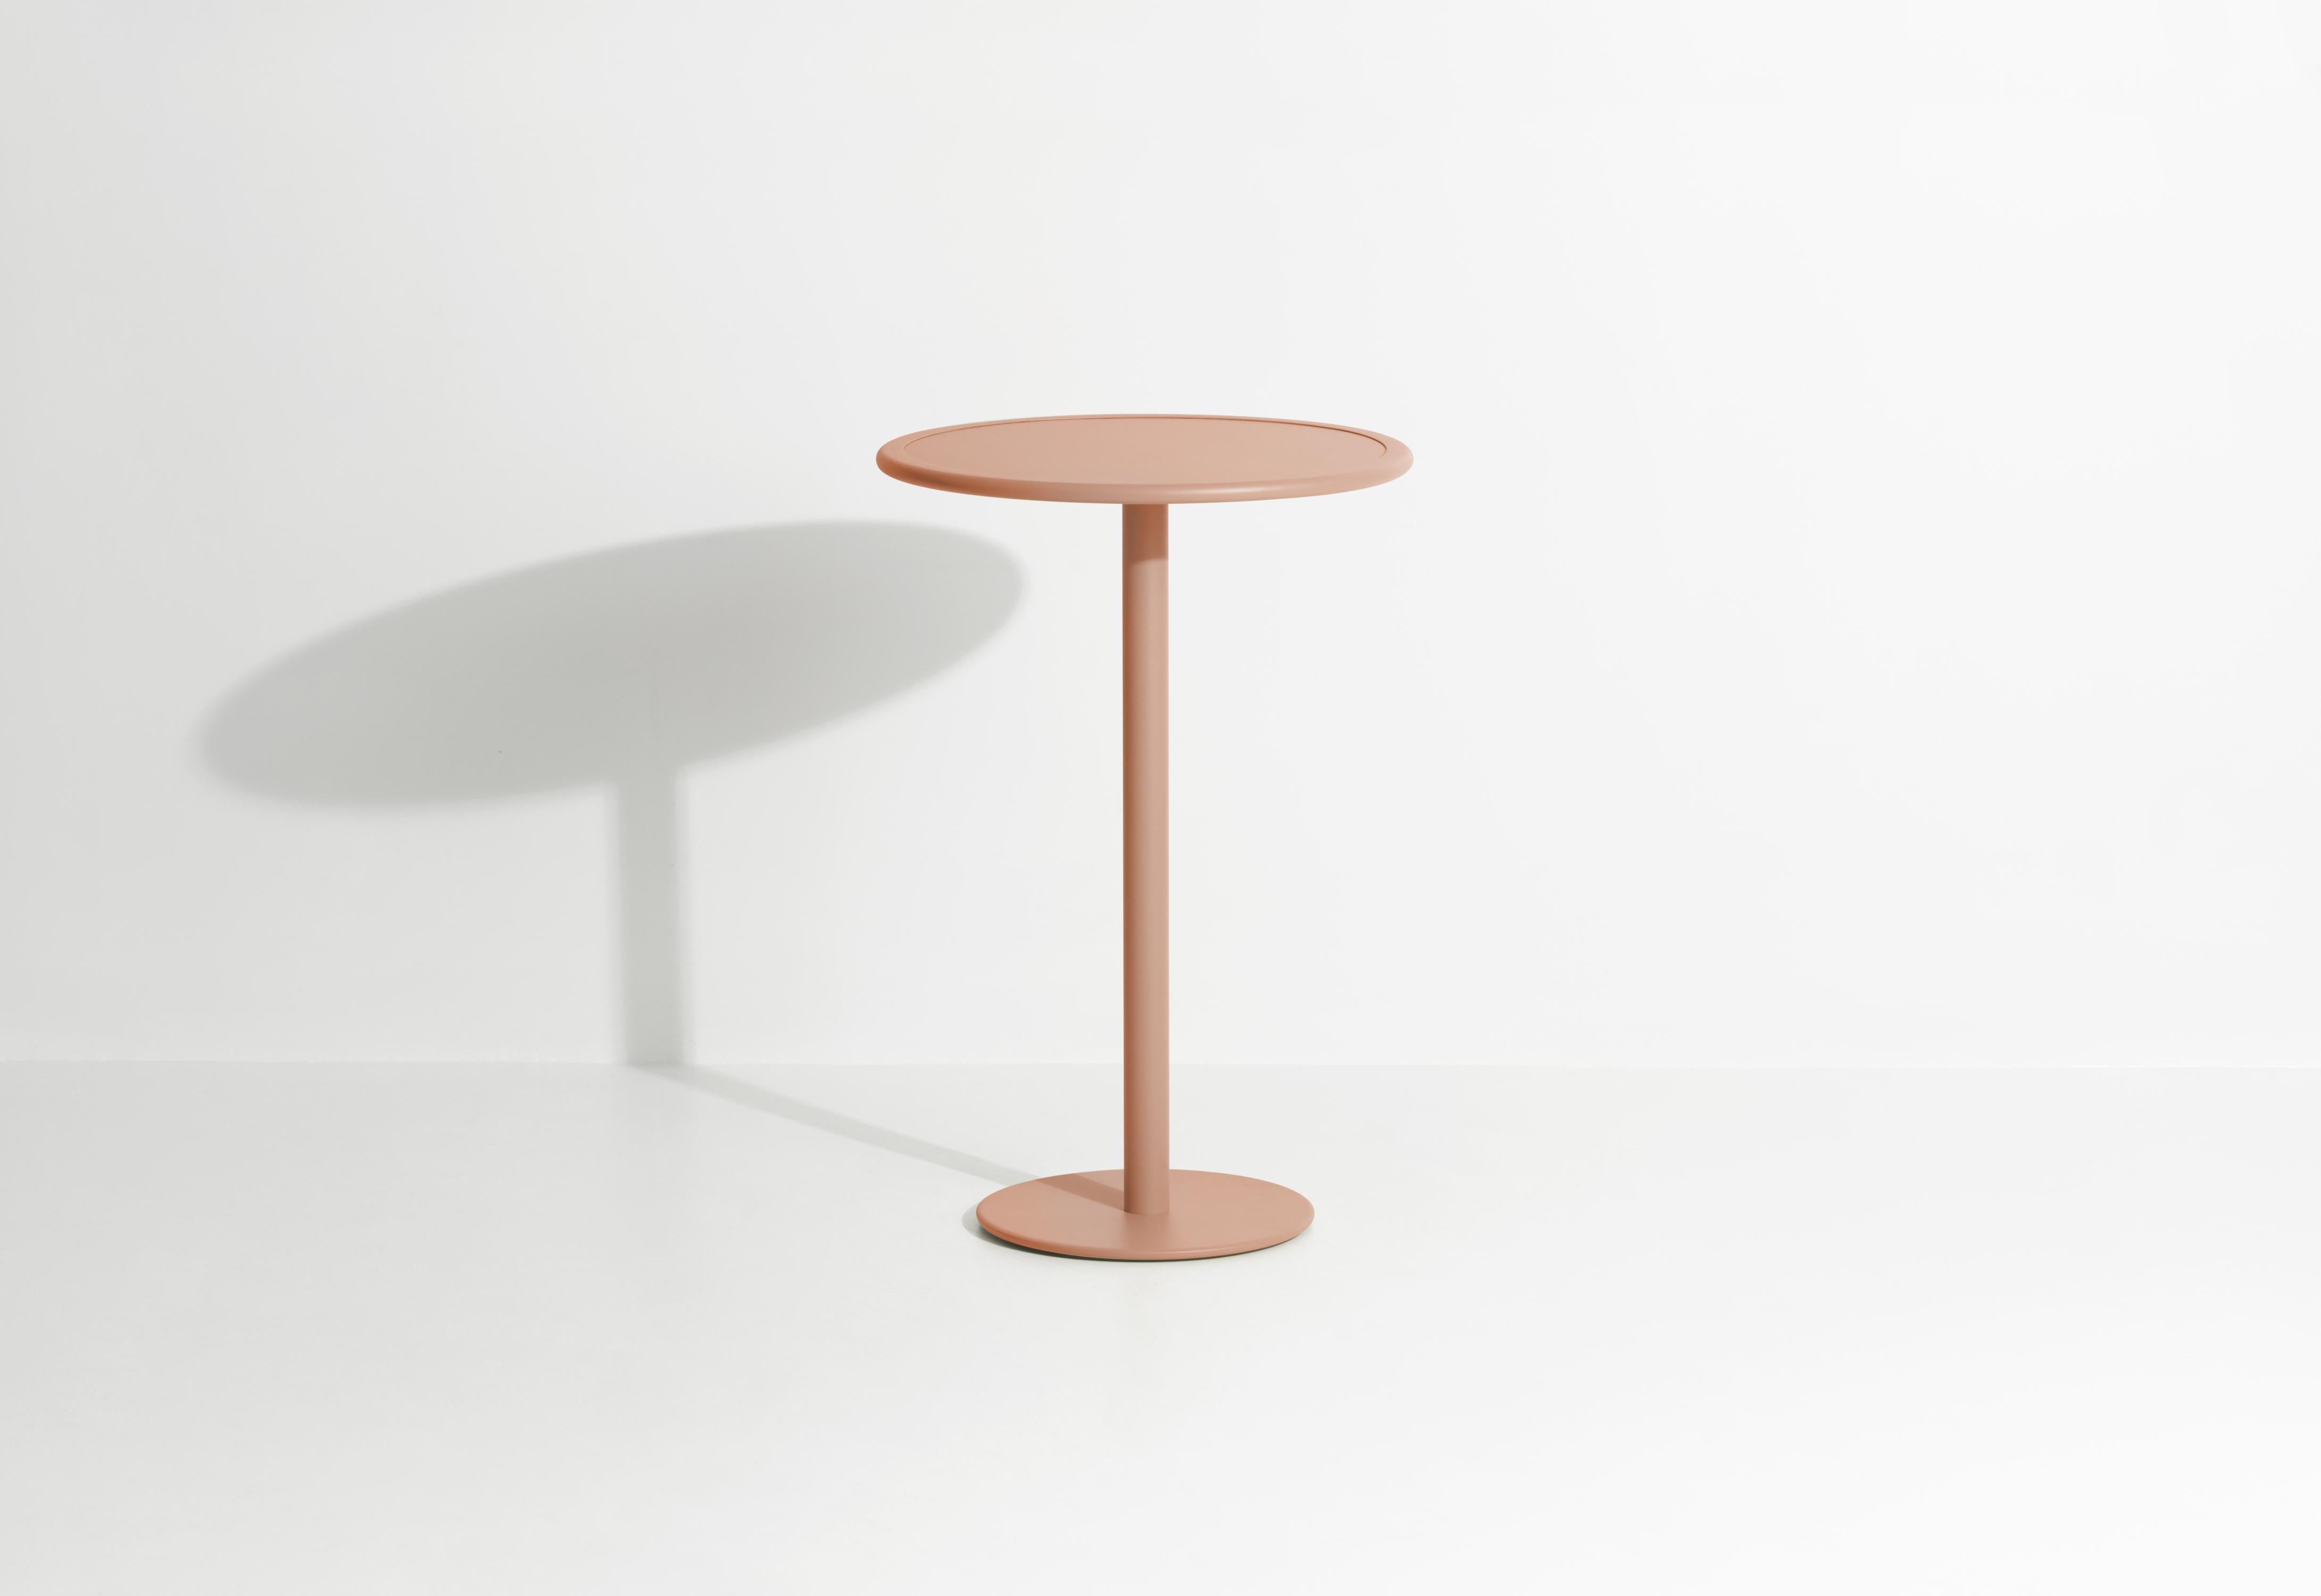 Petite Friture Week-End Round High Table in Blush Aluminium by Studio BrichetZiegler, 2017

The week-end collection is a full range of outdoor furniture, in aluminium grained epoxy paint, matt finish, that includes 18 functions and 8 colours for the